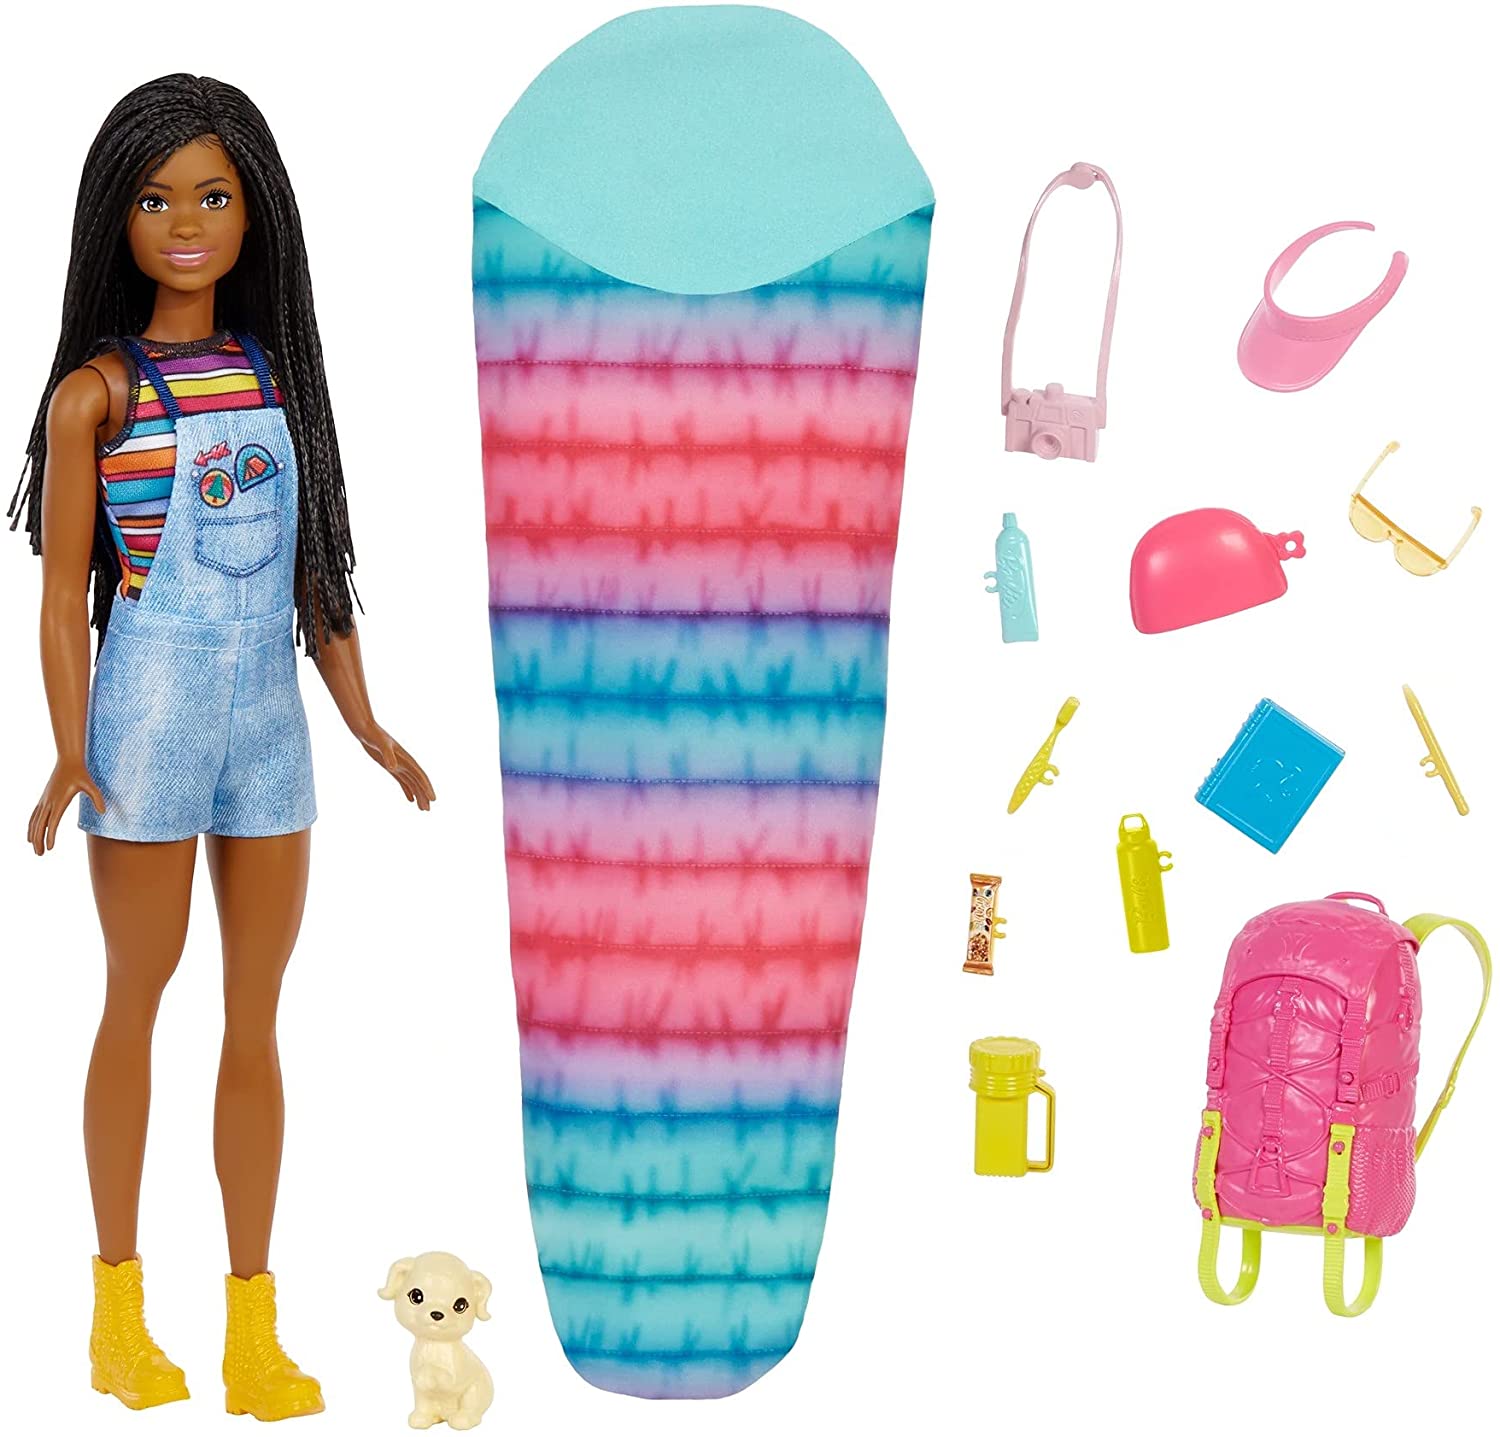 Barbie It Takes Two camping dolls with Backpack, Sleeping Bag and 